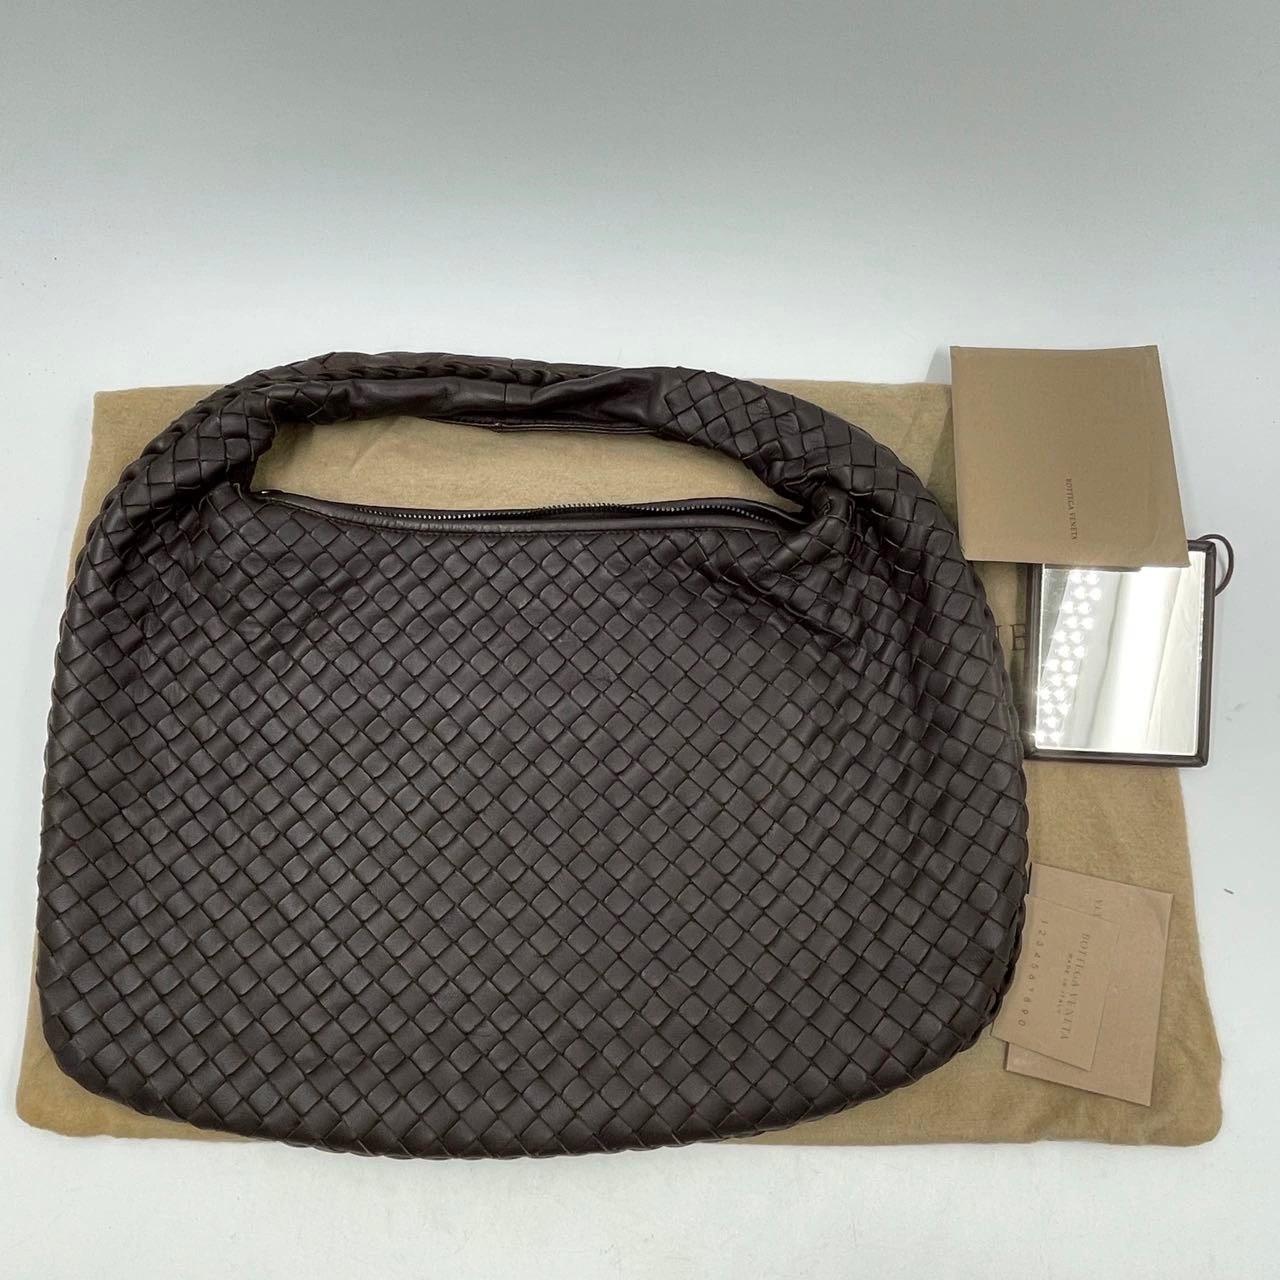 This Bottega Veneta Hobo Bag is an exceptional piece of luxury, crafted from lambskin leather with the instantly recognizable Intrecciato weave. Measuring 40cm wide at the base, roomy enough for all your essentials, it's the perfect winter accessory